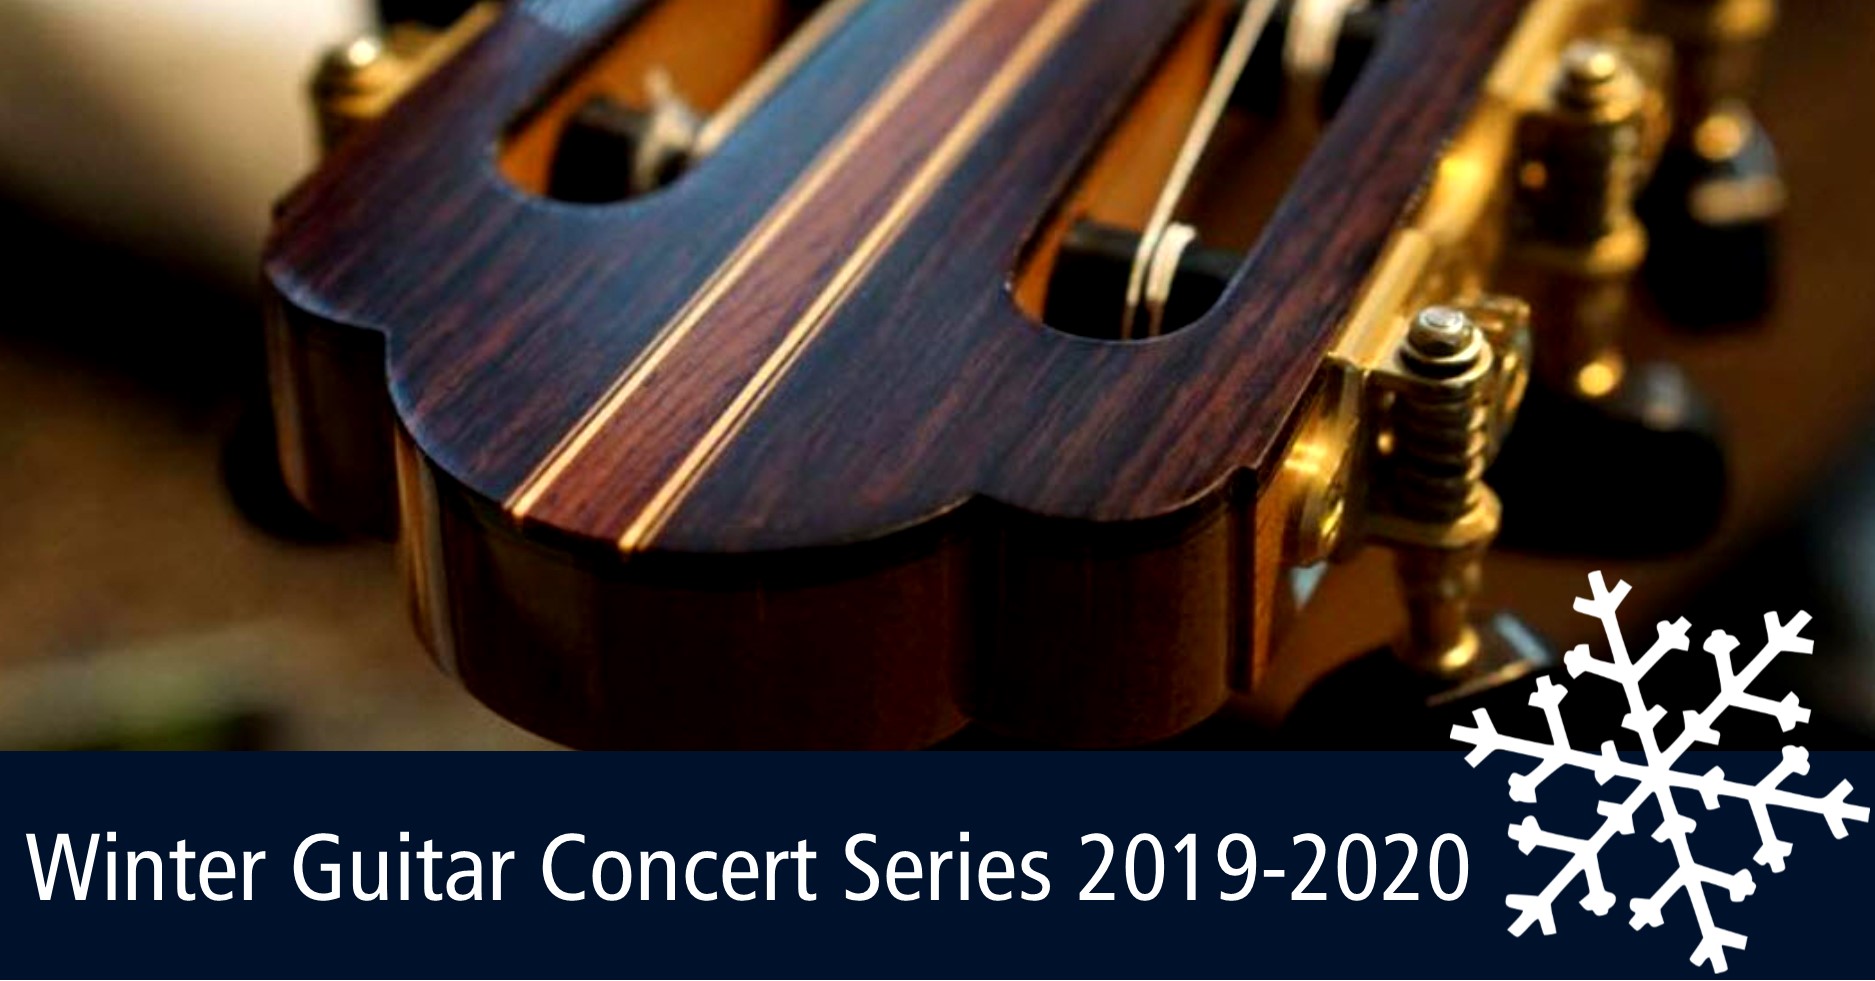 Photo of guitar head stock, and text that says "Winter Guitar Concert Series, 2019-2020"